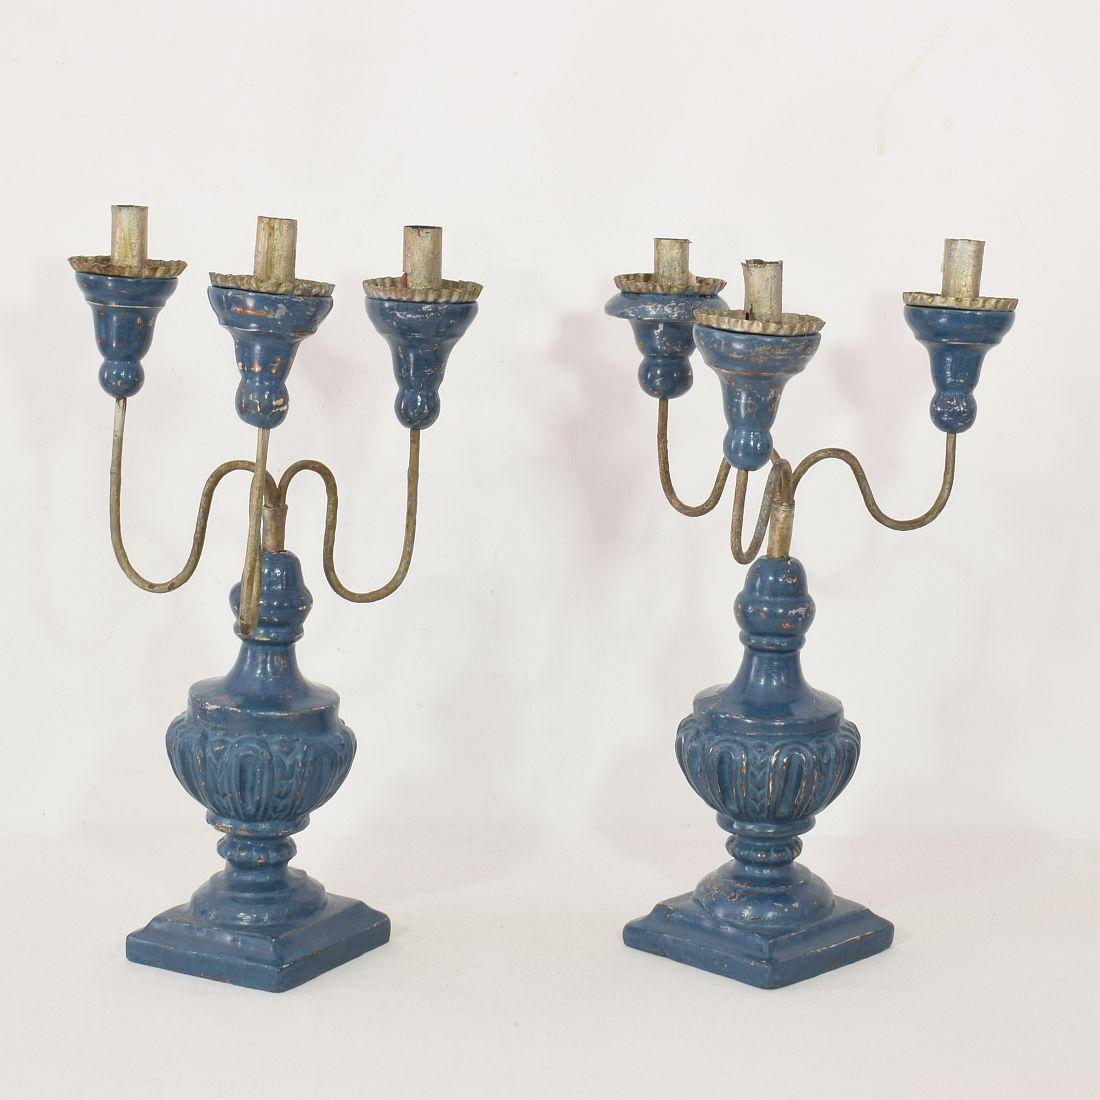 Hand-Crafted Pair of 18th Century Italian Neoclassical Candleholders